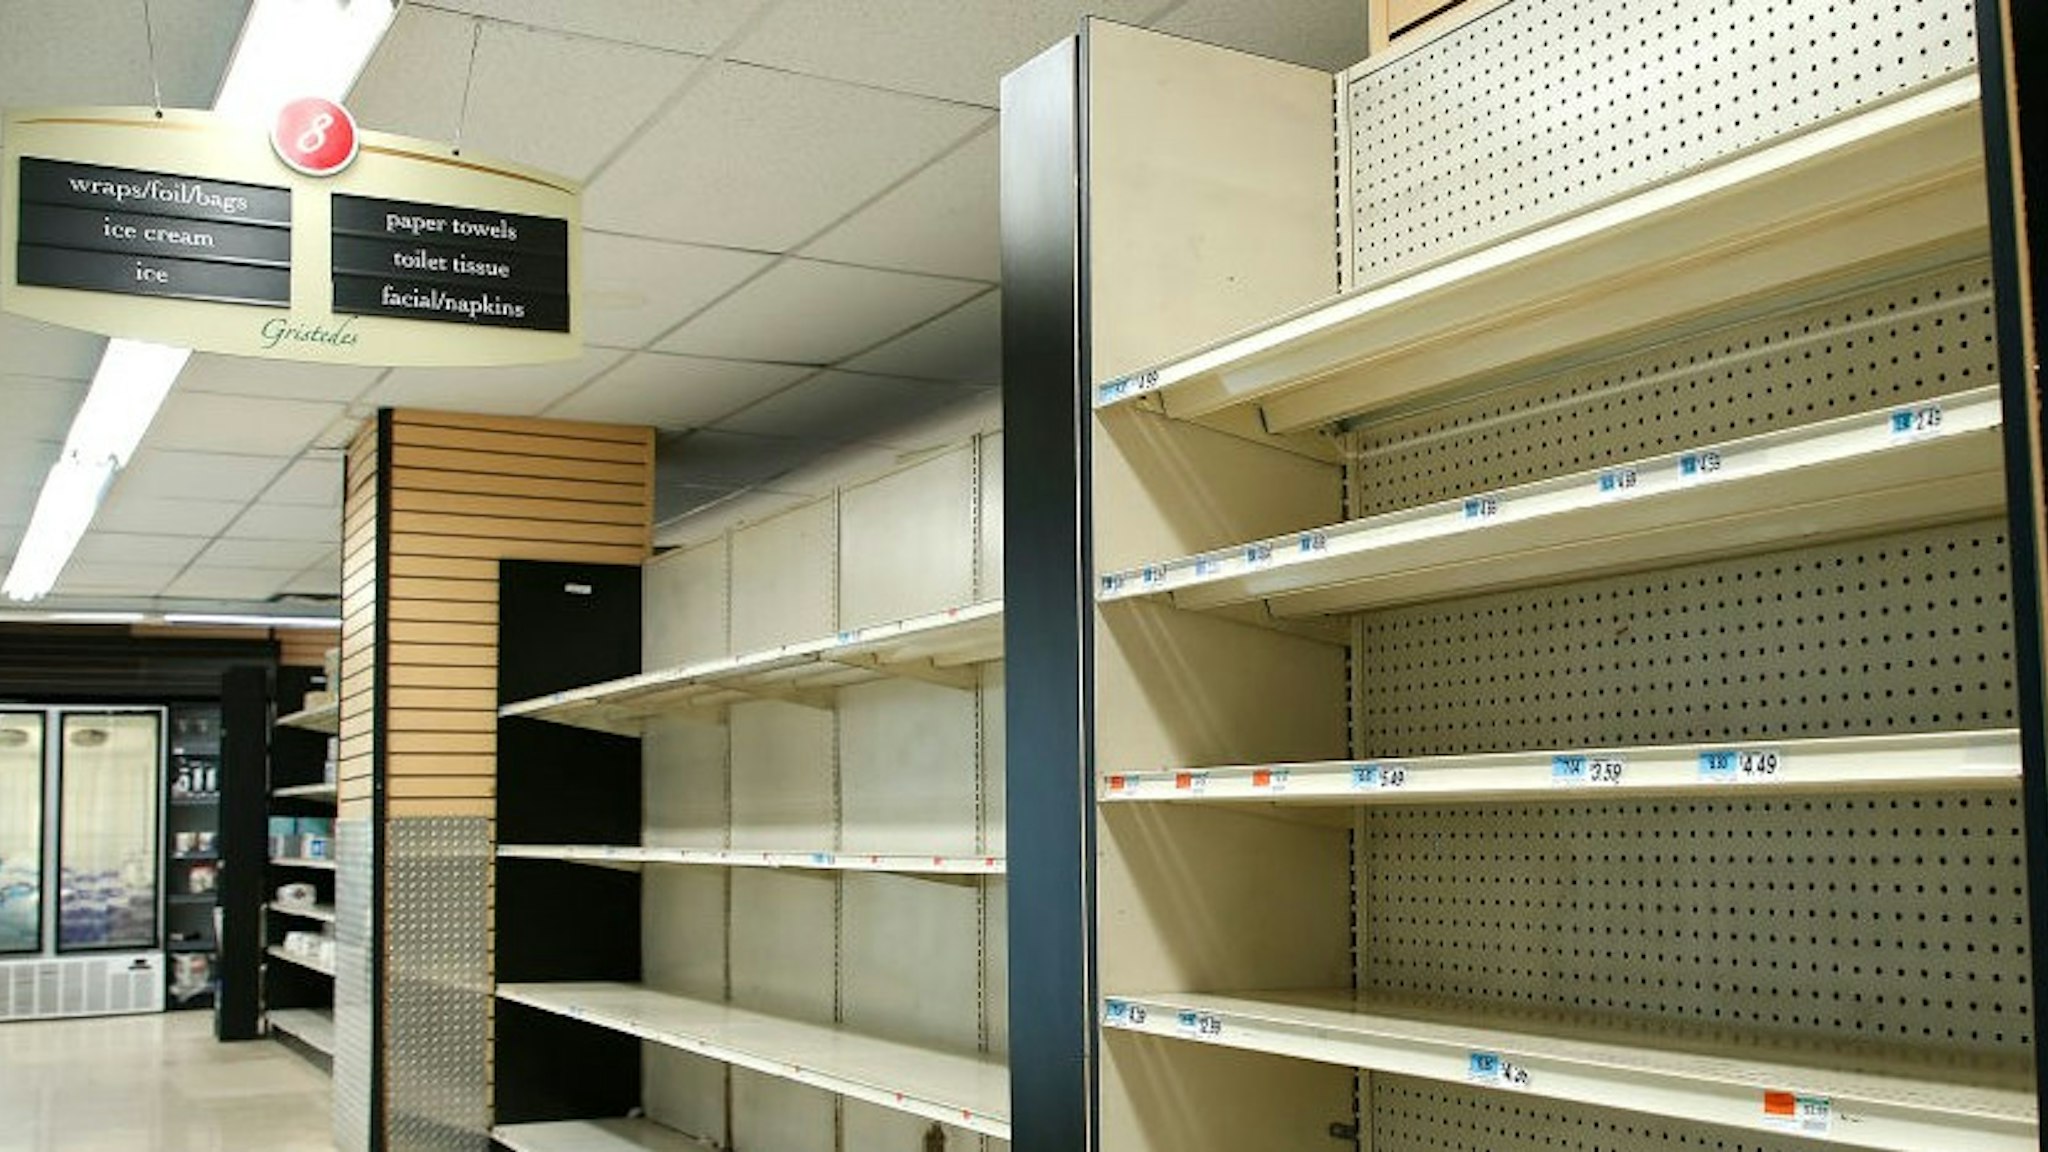 NEW YORK, UNITED STATES - MARCH 21, 2020: Empty store shelves are seen in a supermarket as people has been stocking up for food and other essential items fearing the supply shortages. As the coronavirus (COVID-19) continues to spread throughout the United States, New Yorkers continue with daily routines limited to shopping and other essential tasks. On March 21, 2020 Governor Andrew Cuomo of New York announced that New York City has become the epicenter of the coronavirus surpassing 10,000 cases.- PHOTOGRAPH BY John Lamparski / Echoes Wire/ Barcroft Studios / Future Publishing (Photo credit should read